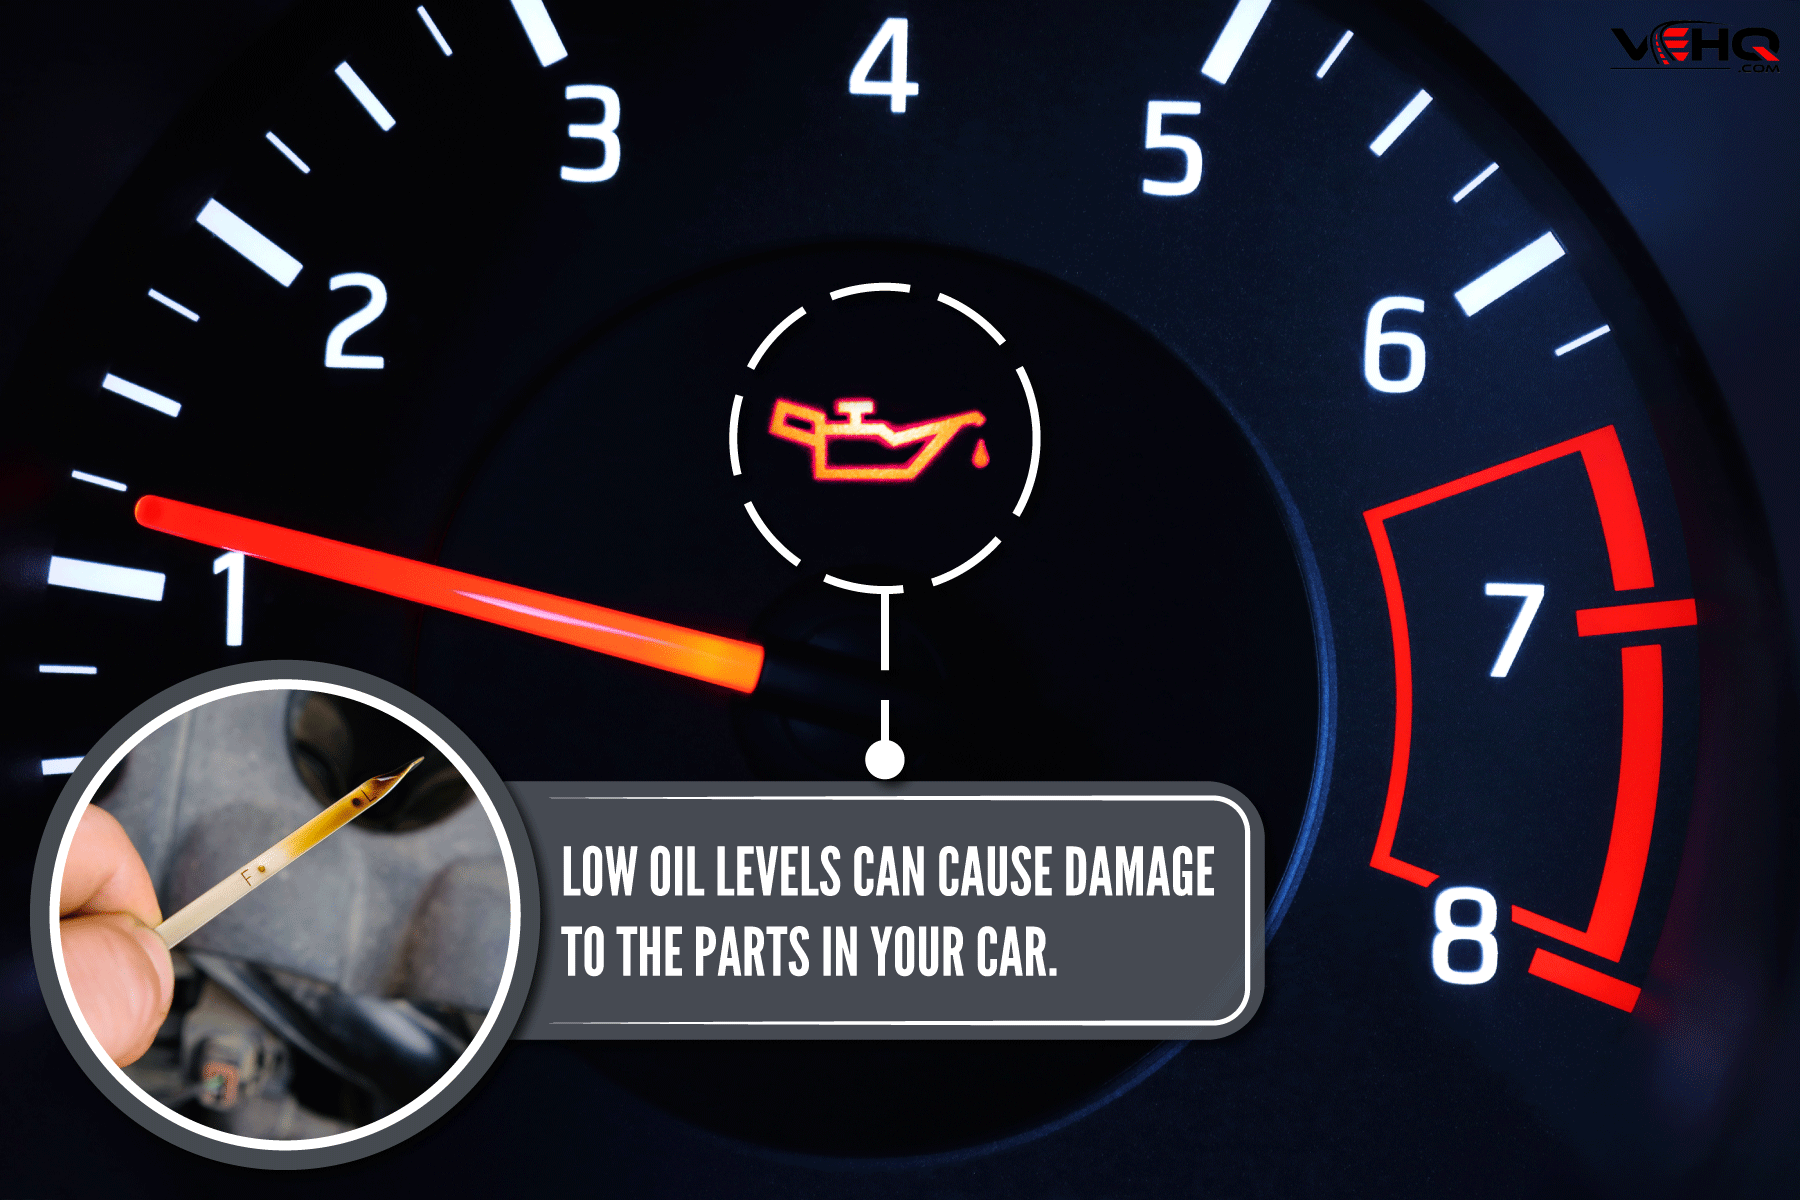 Why is my car not starting when the oil pressure is low?